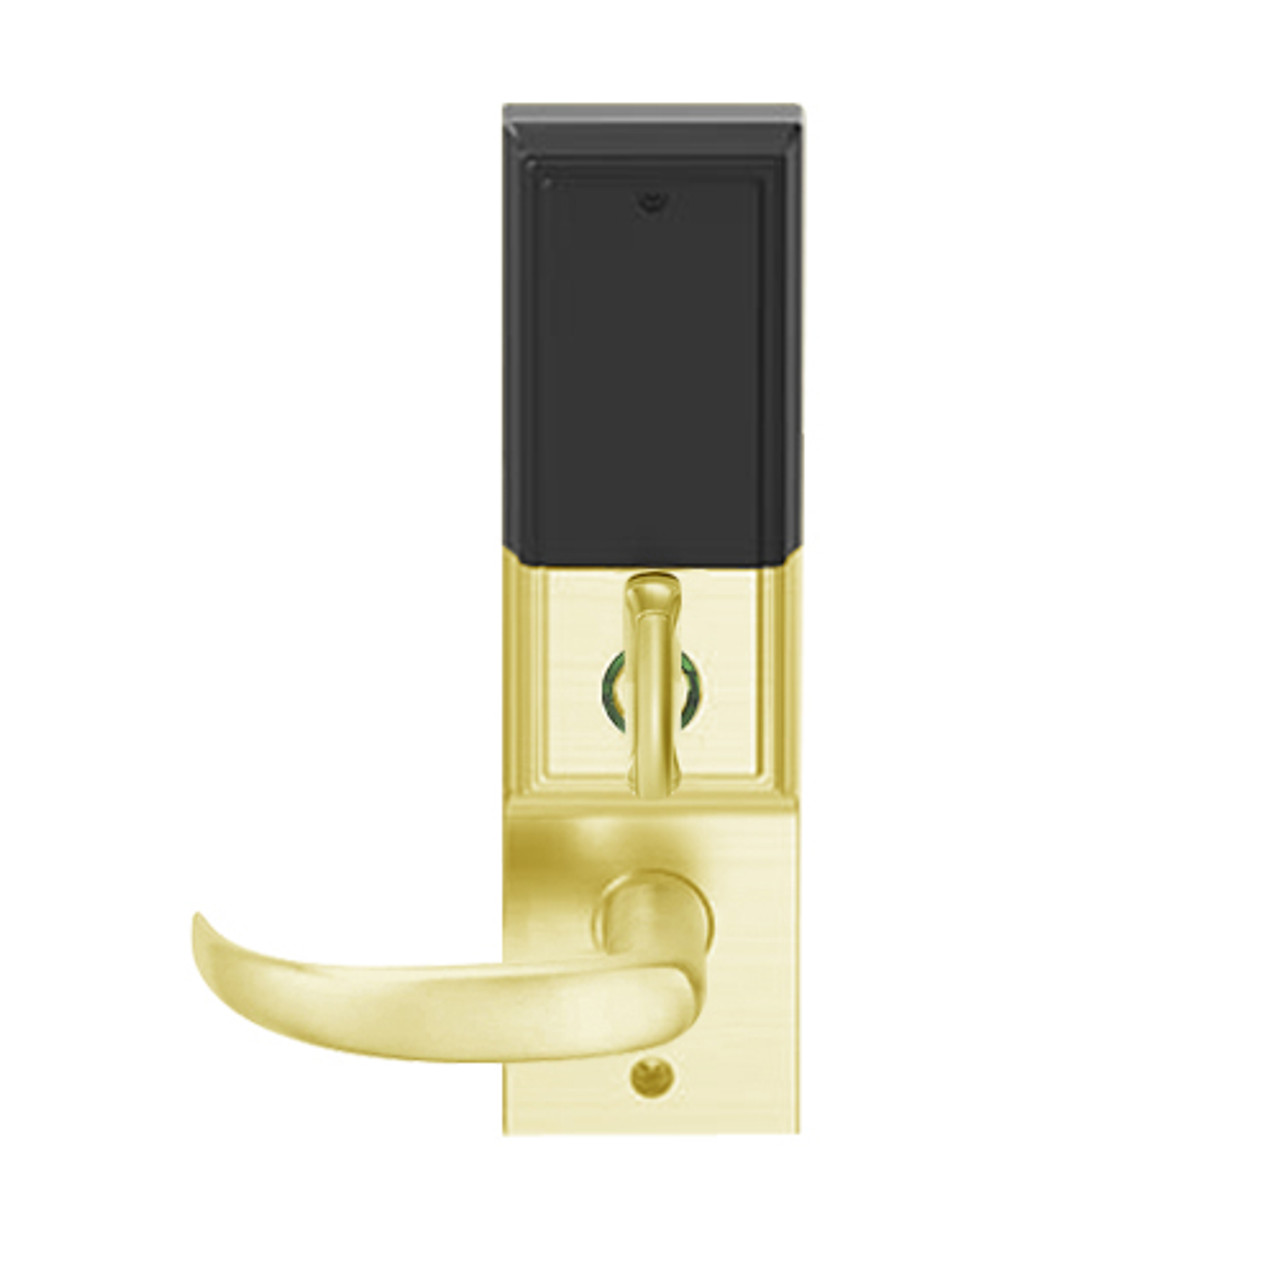 LEMD-ADD-BD-17-605 Schlage Privacy/Apartment Wireless Addison Mortise Deadbolt Lock with LED and Sparta Lever Prepped for SFIC in Bright Brass